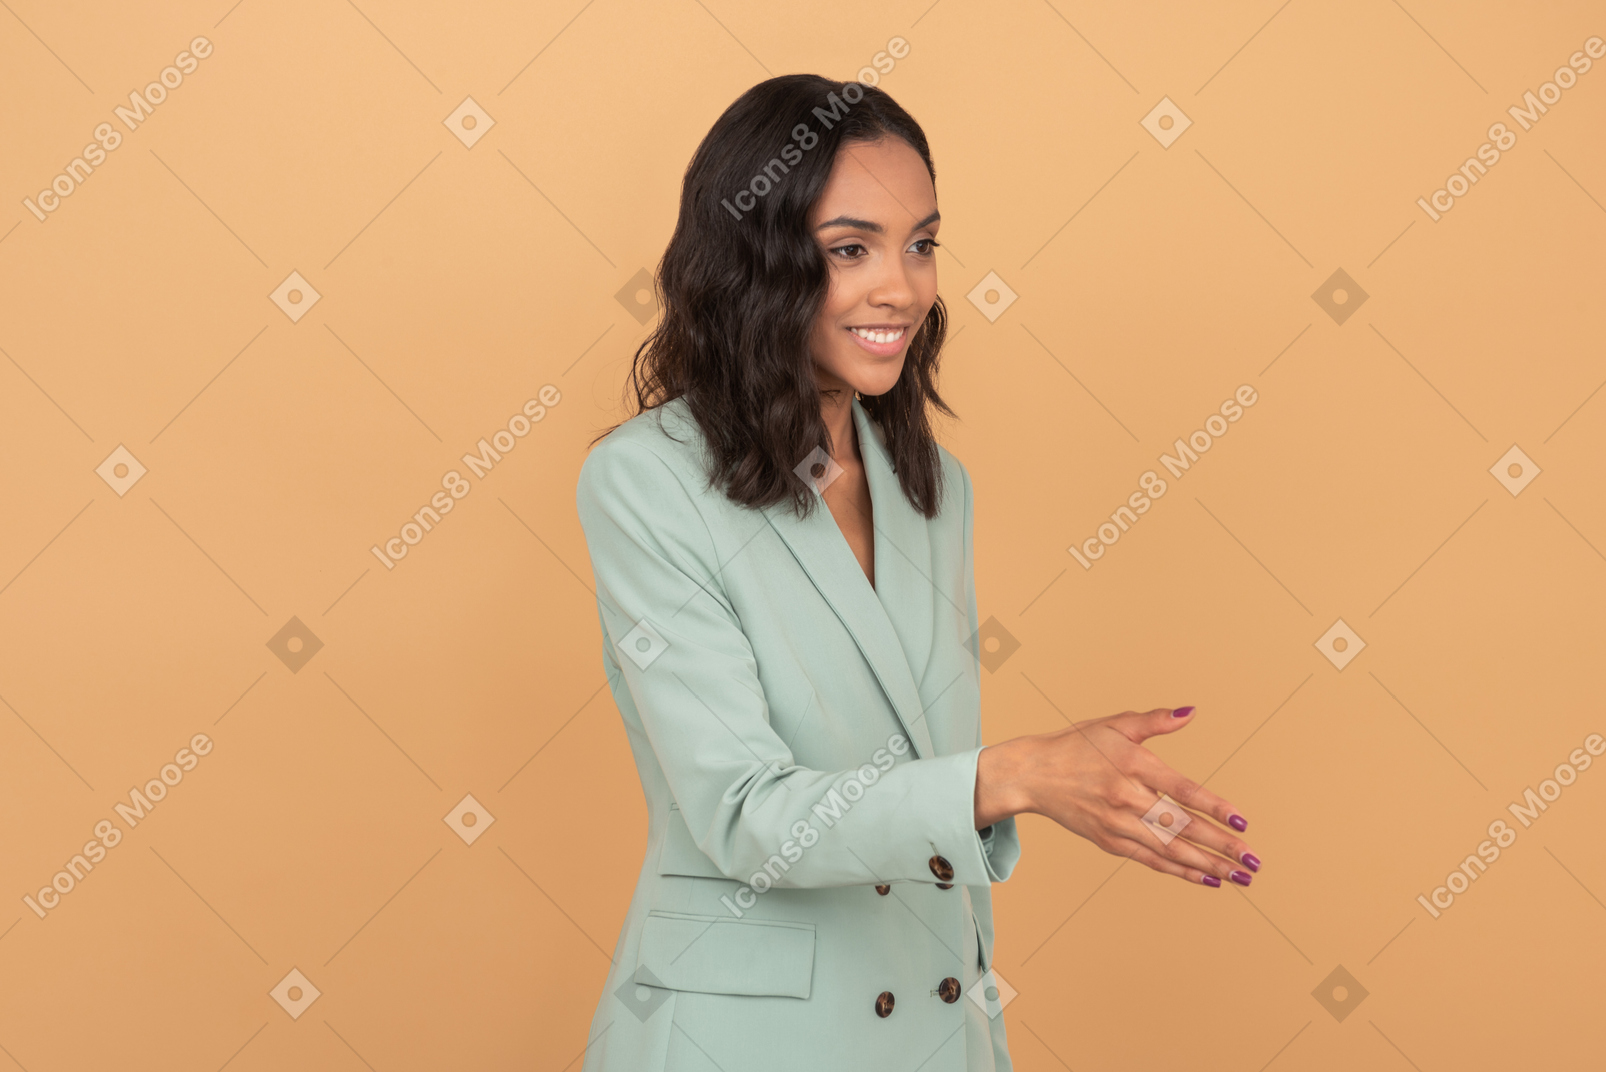 Attractive young woman with nice smile stretching hand for greetings